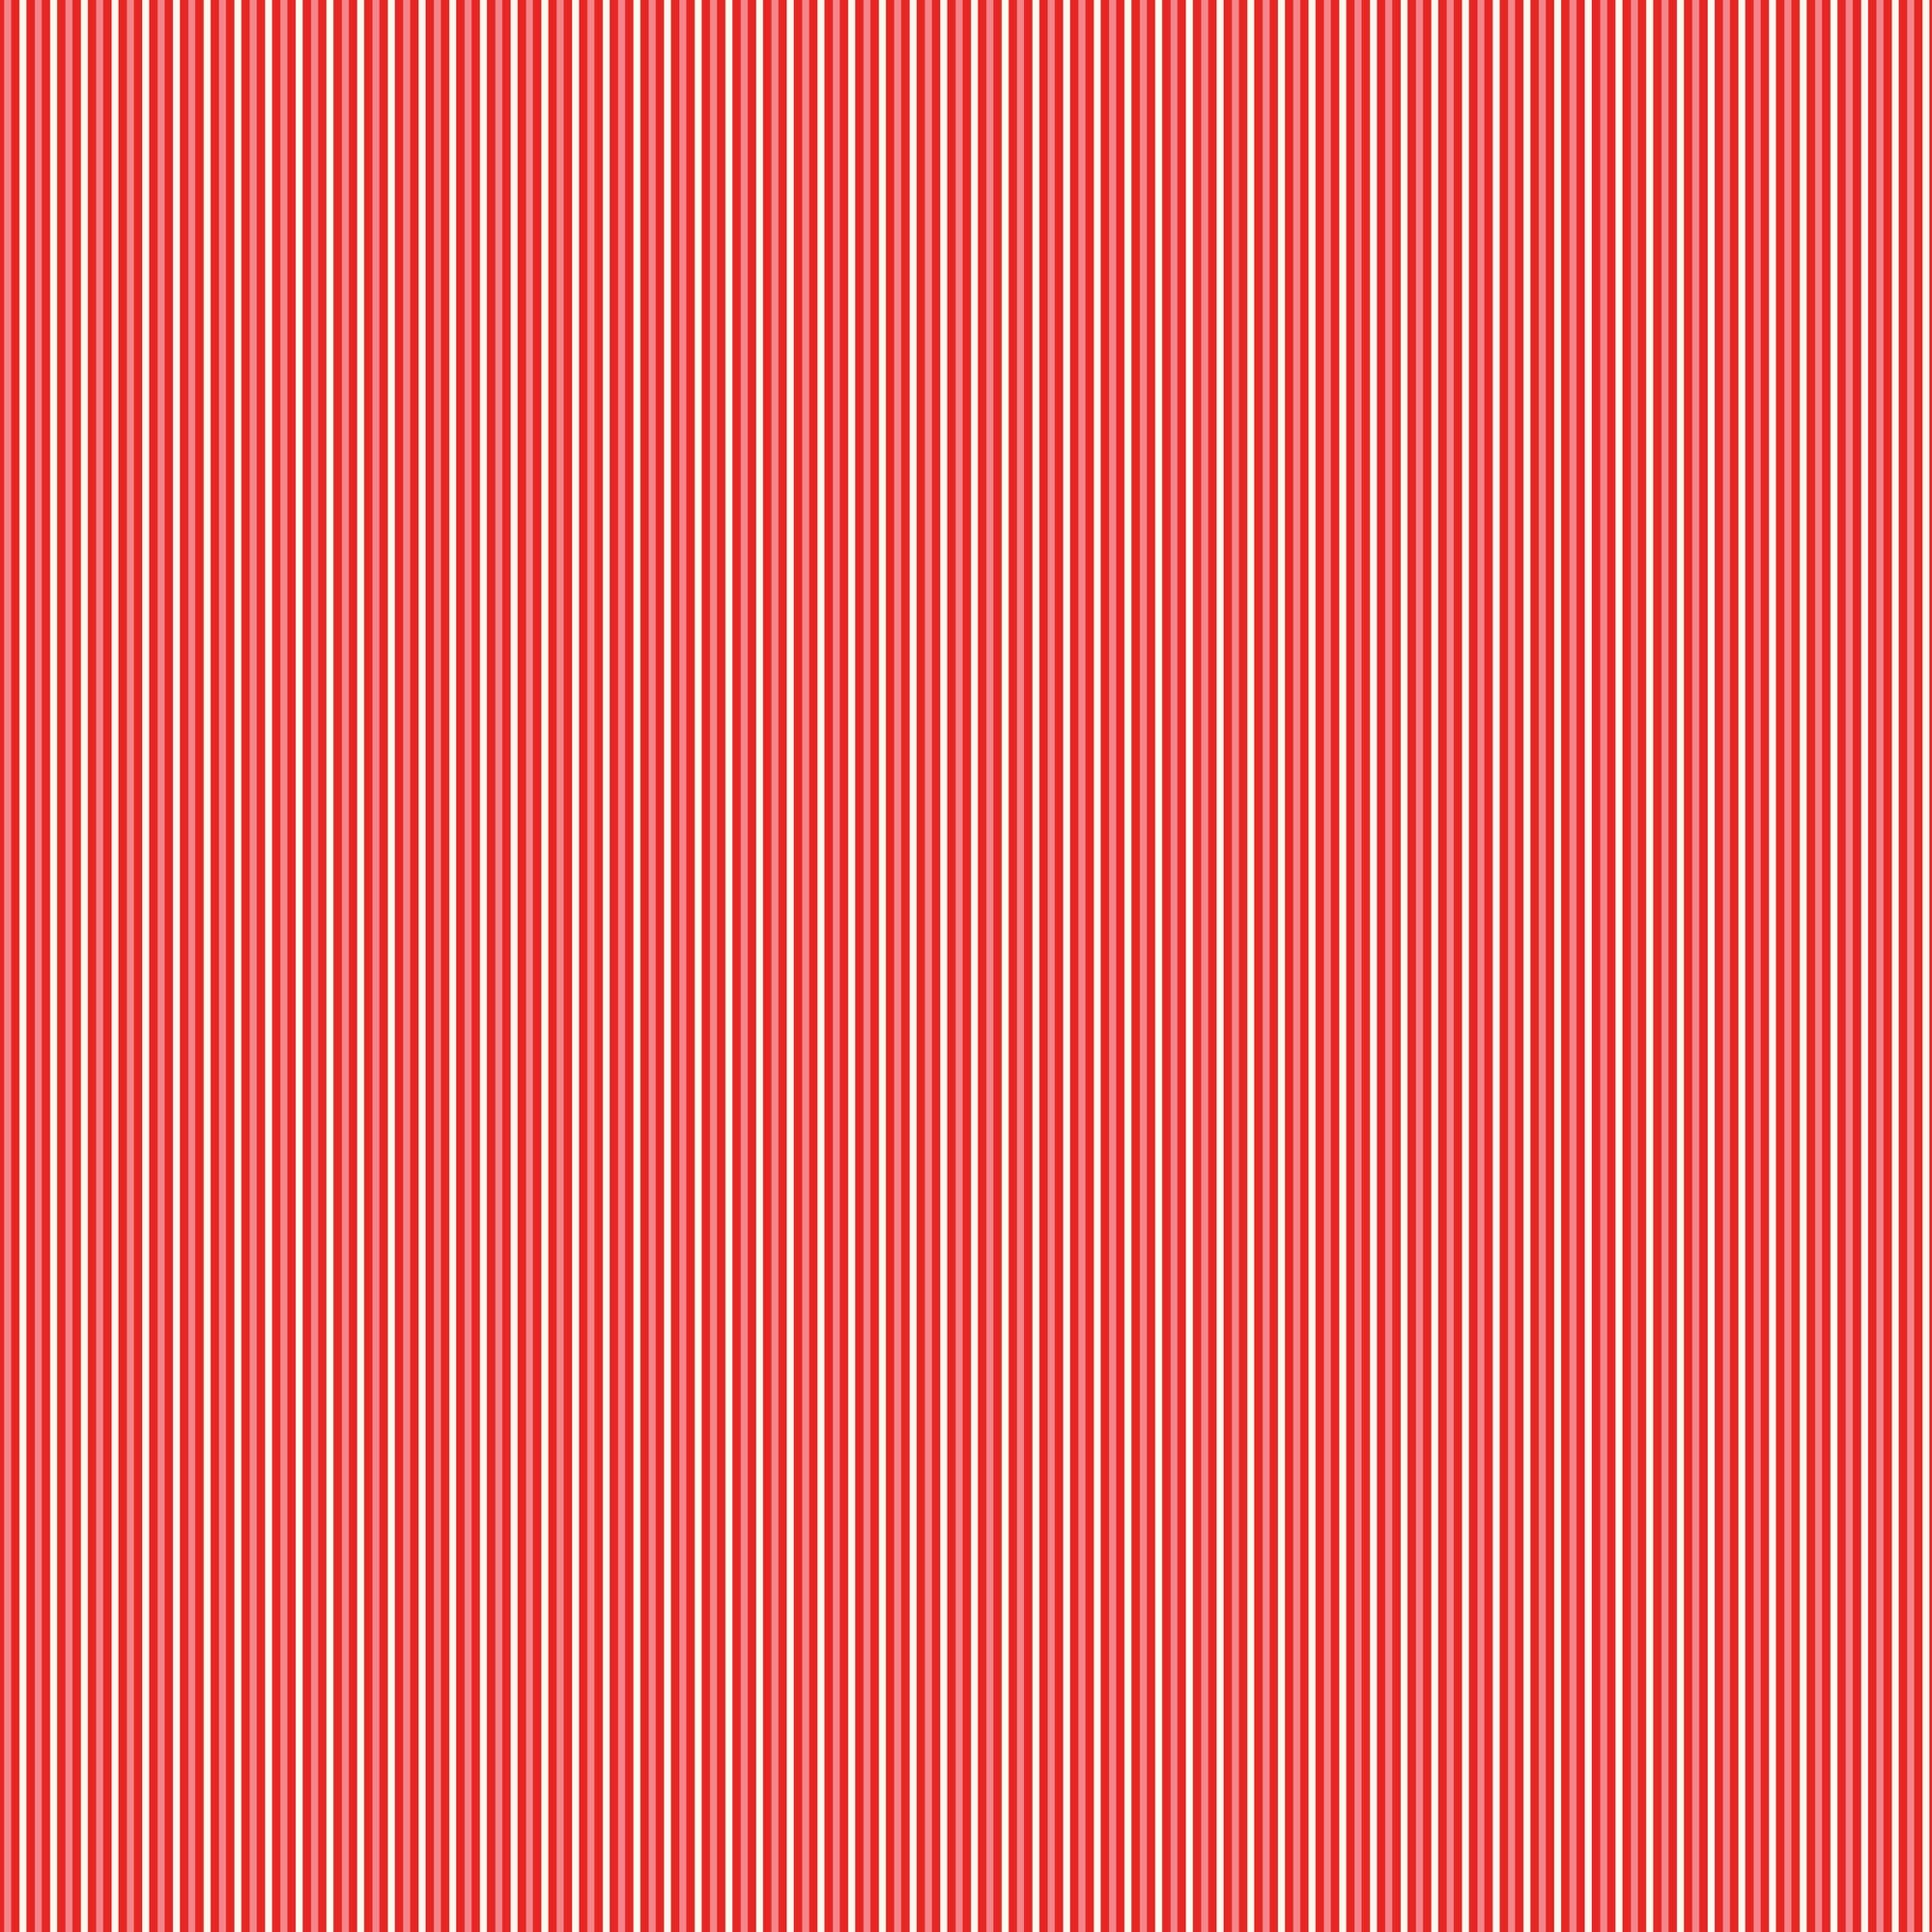 Picnic Florals Stripes - Red - Yardage